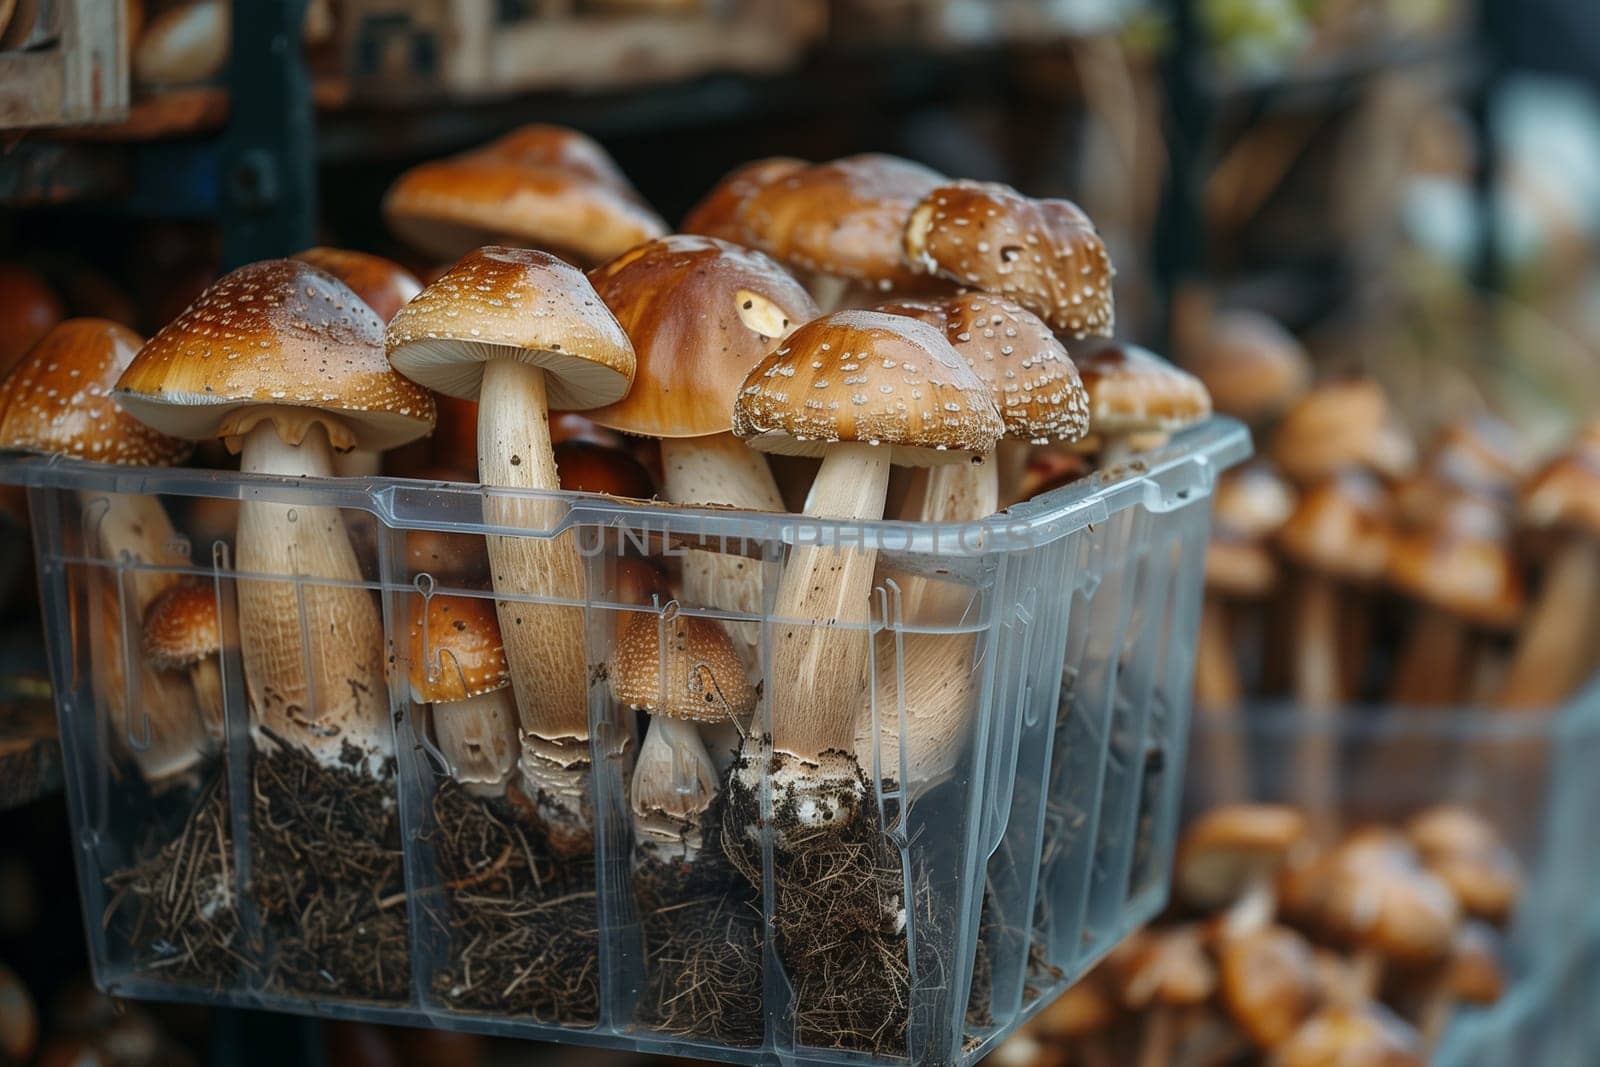 A plastic container filled with an abundance of various mushrooms, showcasing different shapes, sizes, and colors.